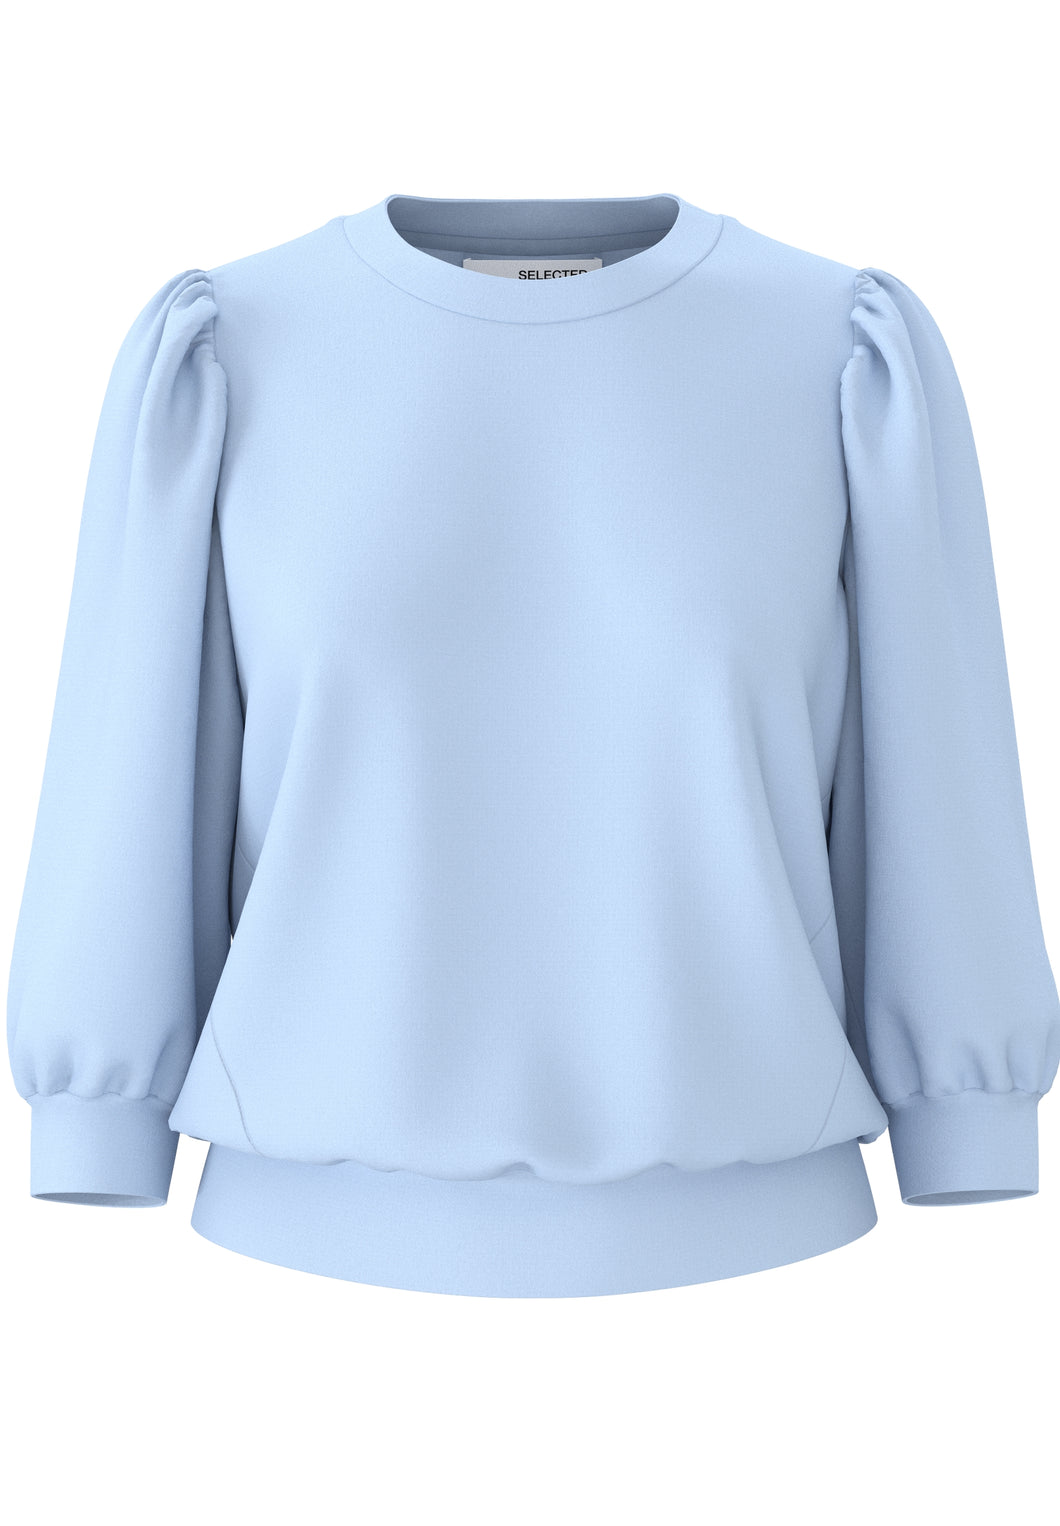 SELECTED SLFTenny 3/4 Sweat Top Cashmere Blue